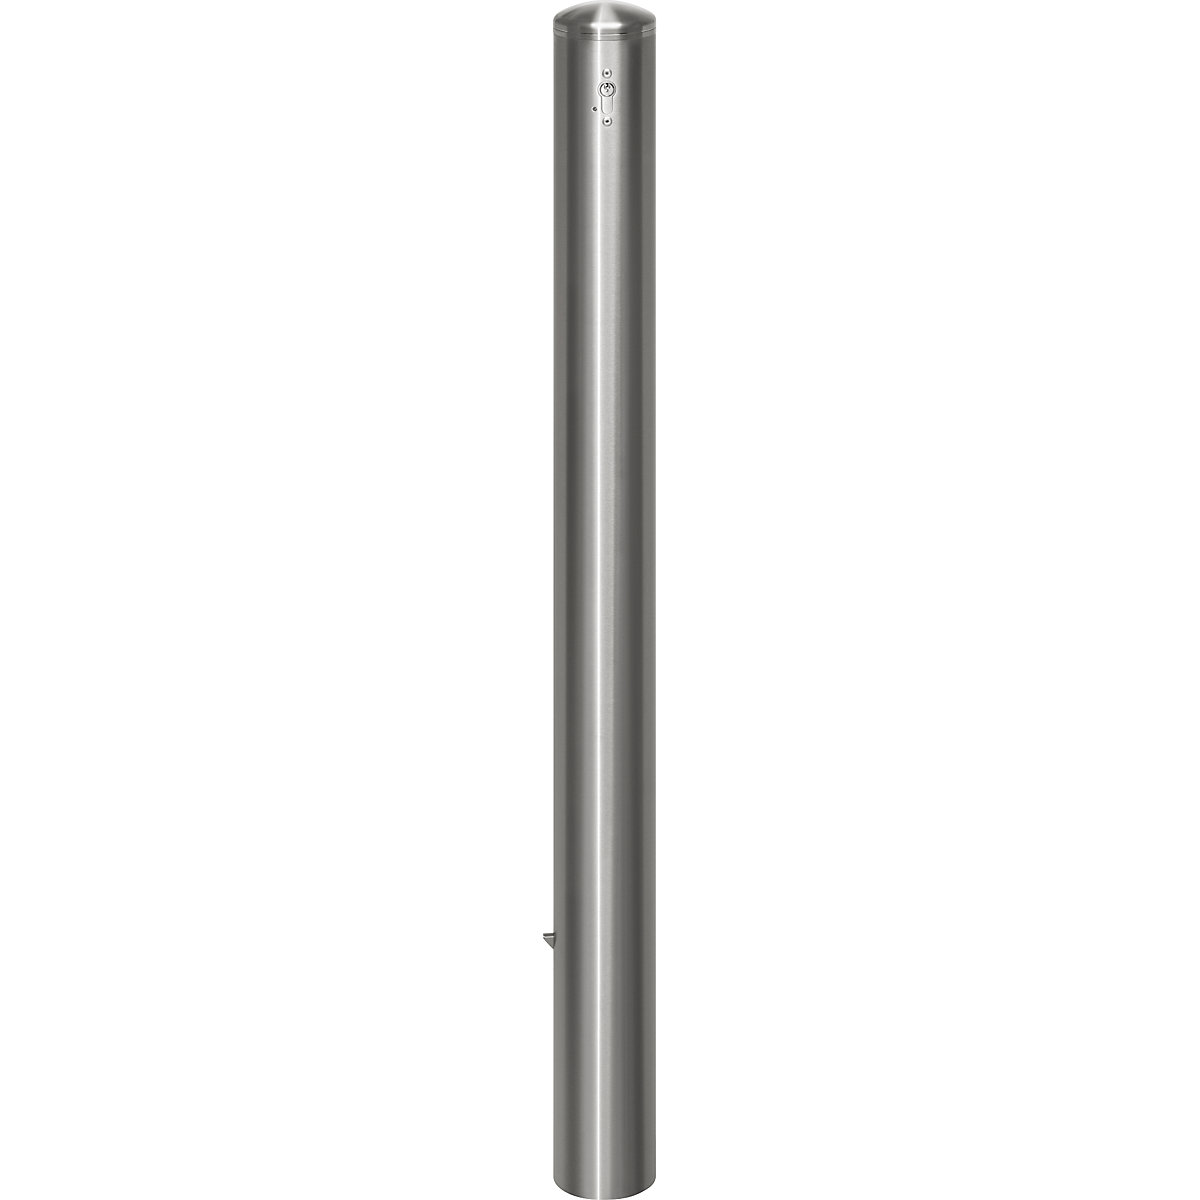 Stainless steel barrier post, with end cap, ground sleeve for concreting in, Ø 102 mm, profile cylinder-10